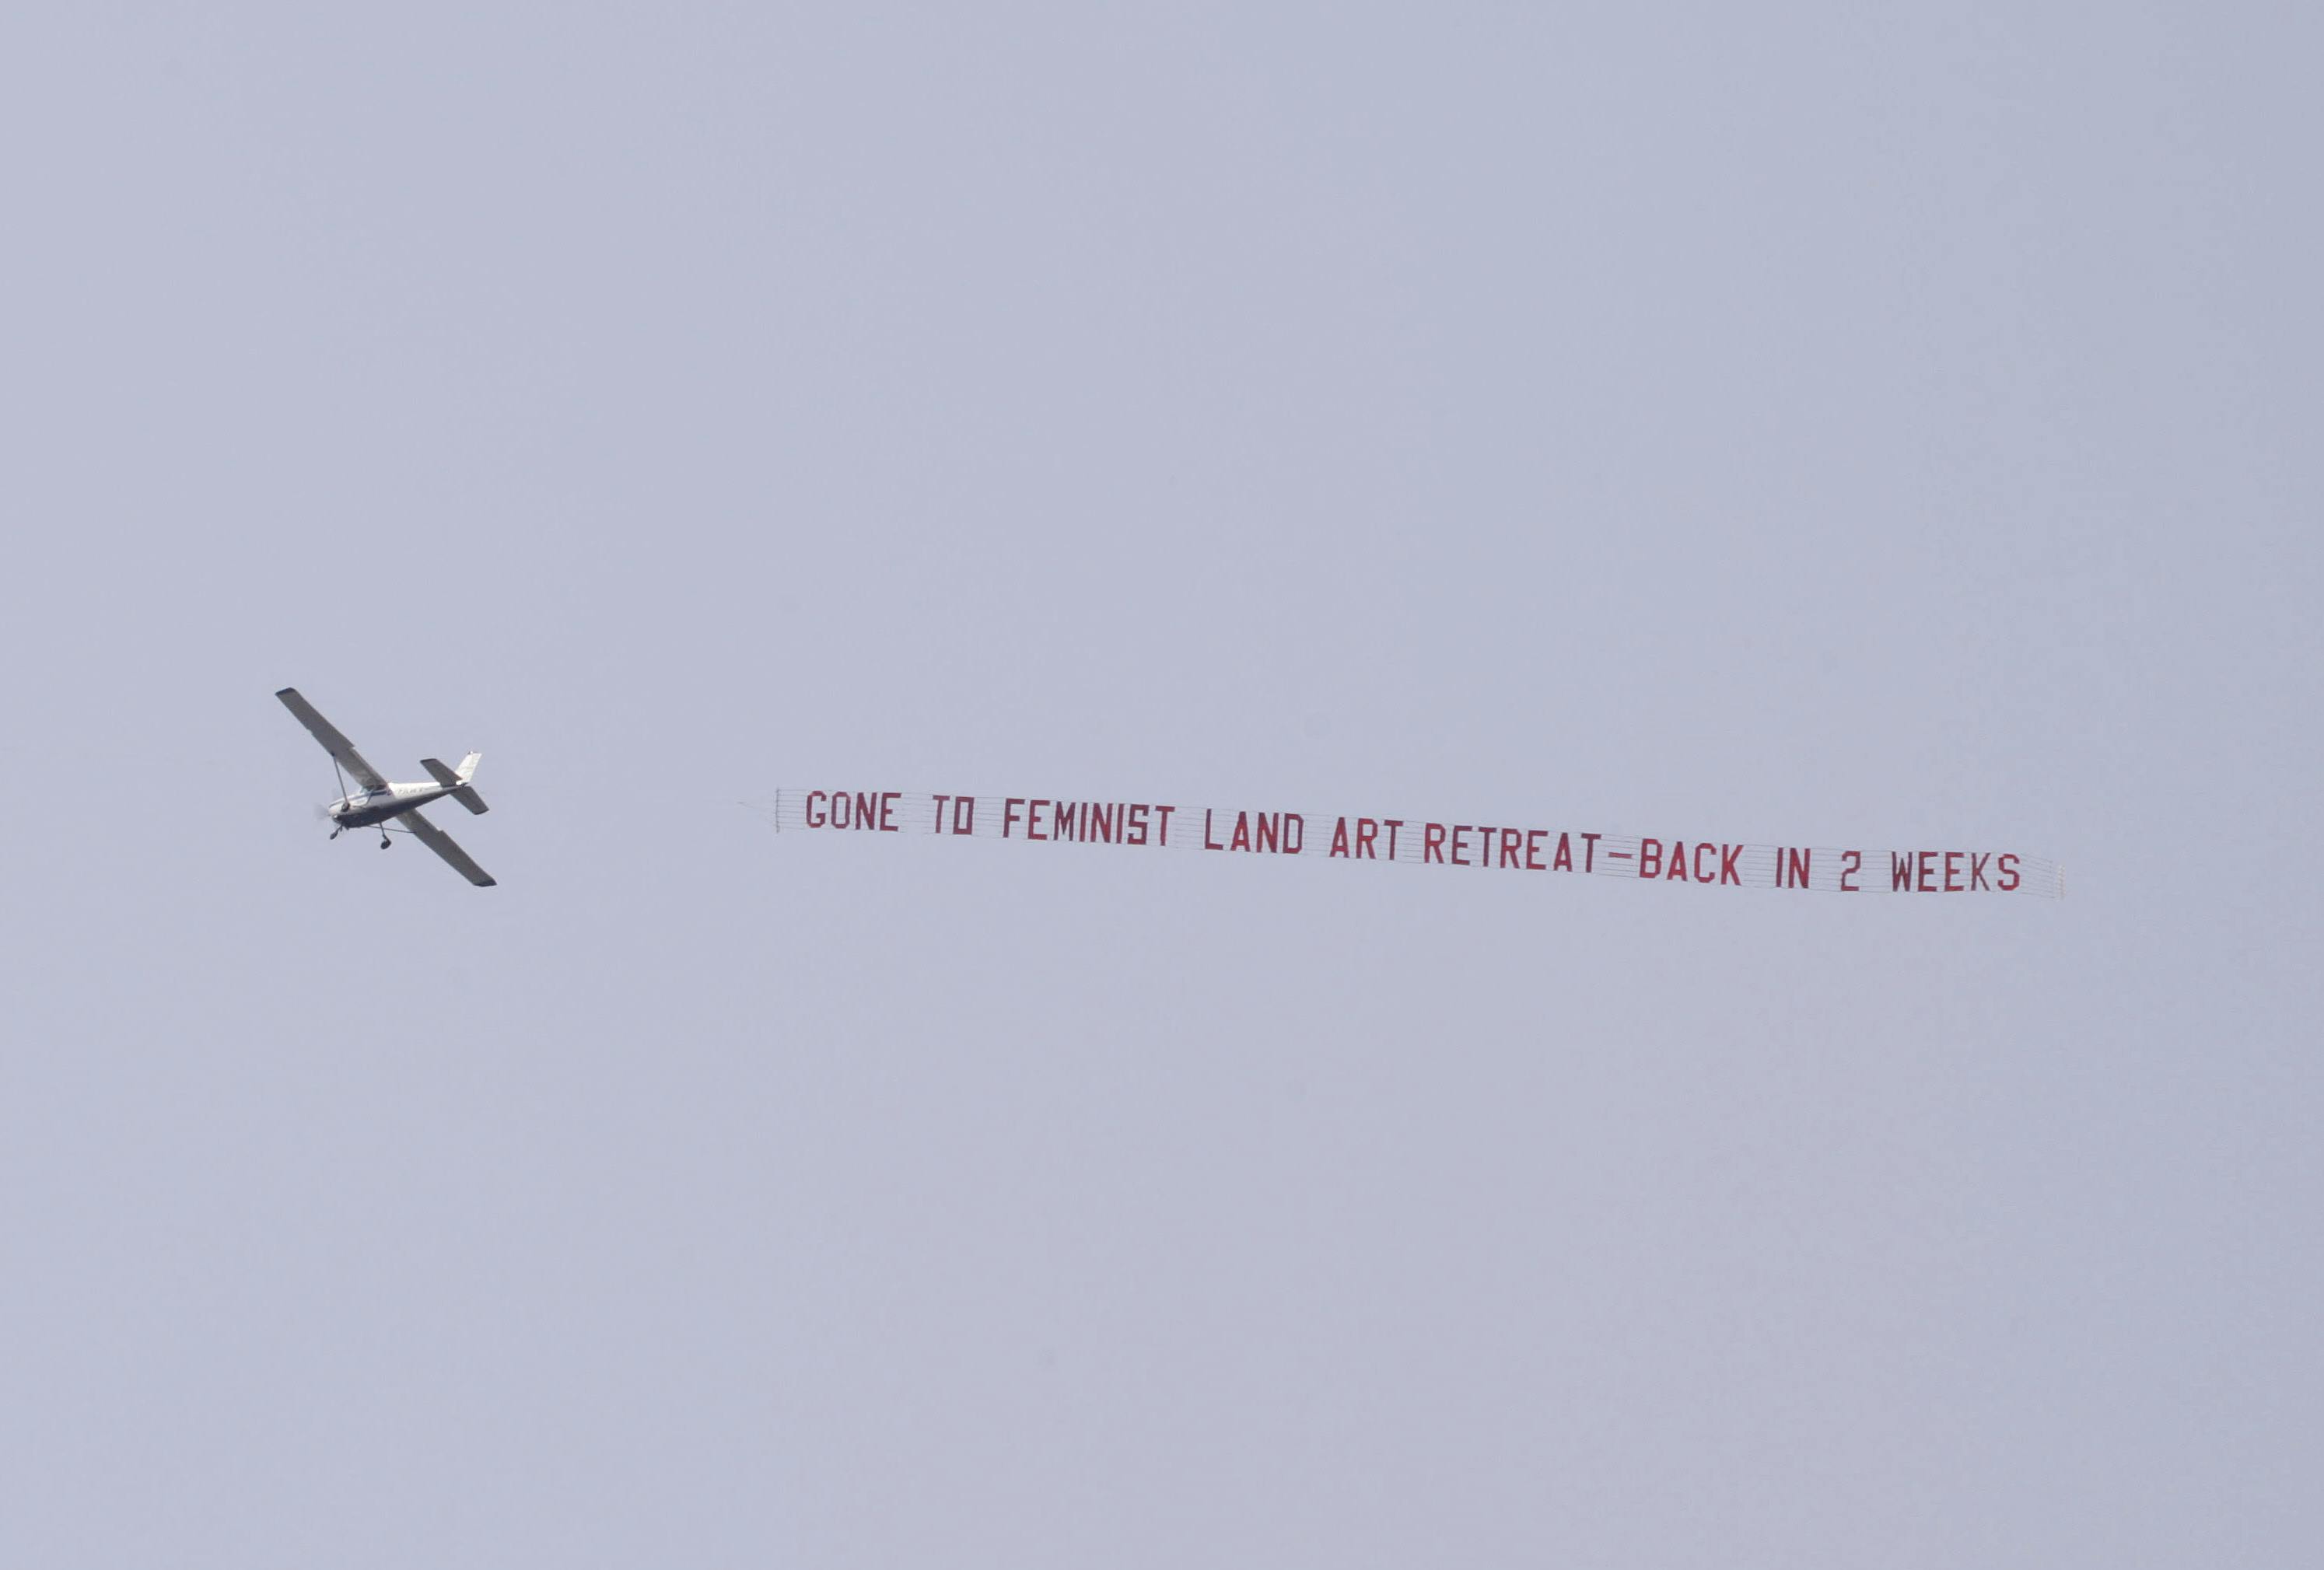 A small plane flying in the sky pulls a banner that says, “gone to feminist land art retreat - back in 2 weeks.”